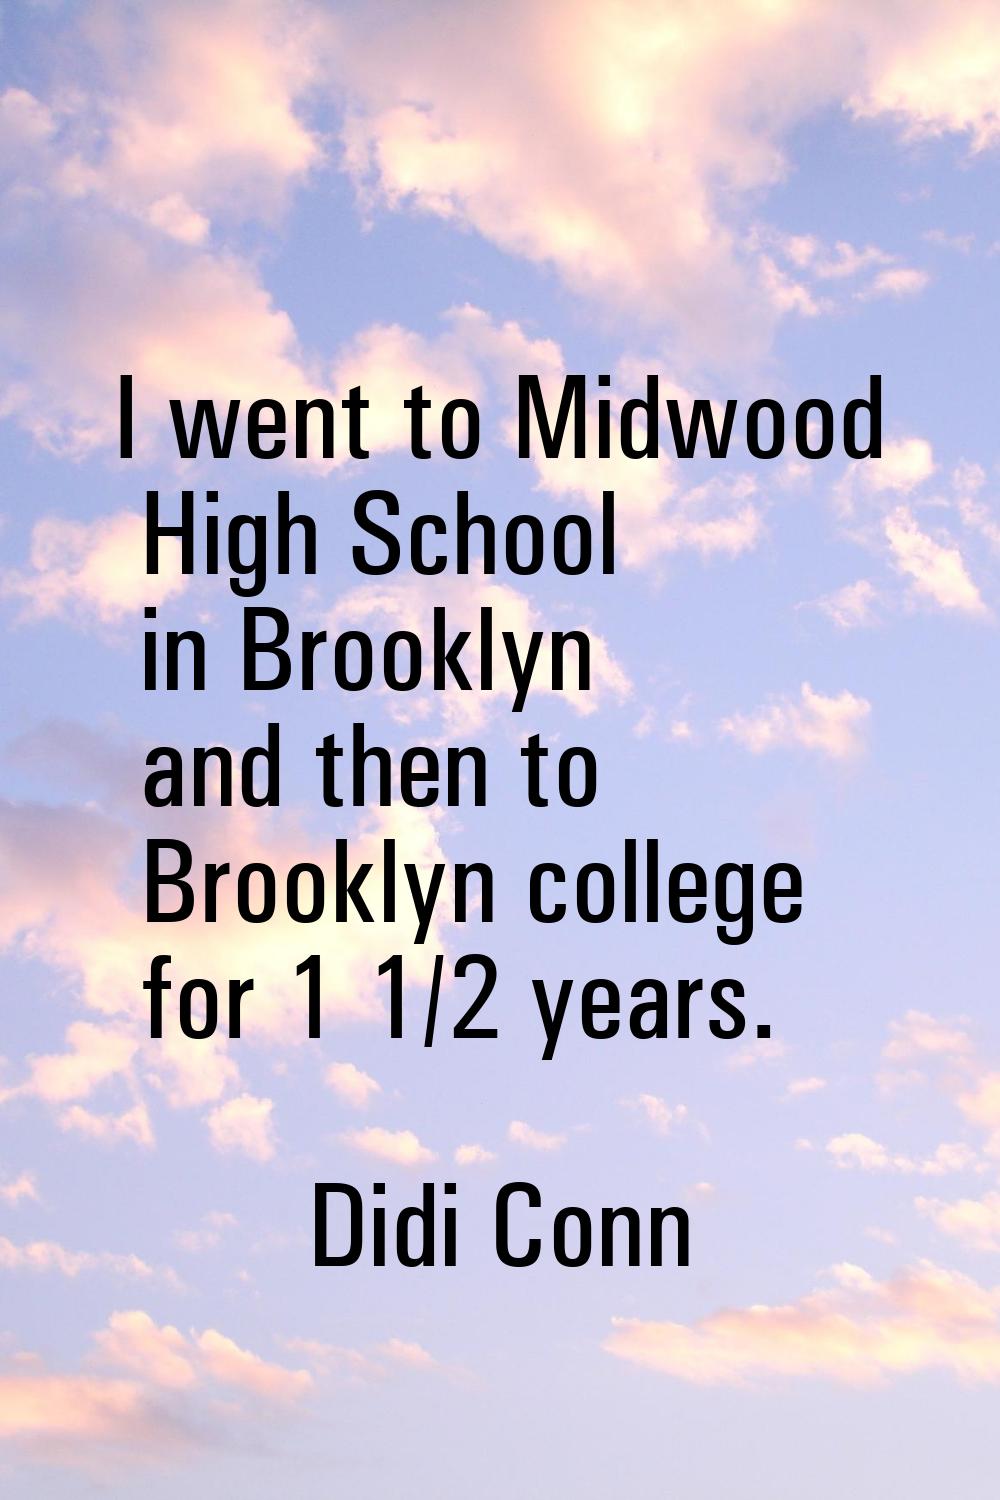 I went to Midwood High School in Brooklyn and then to Brooklyn college for 1 1/2 years.